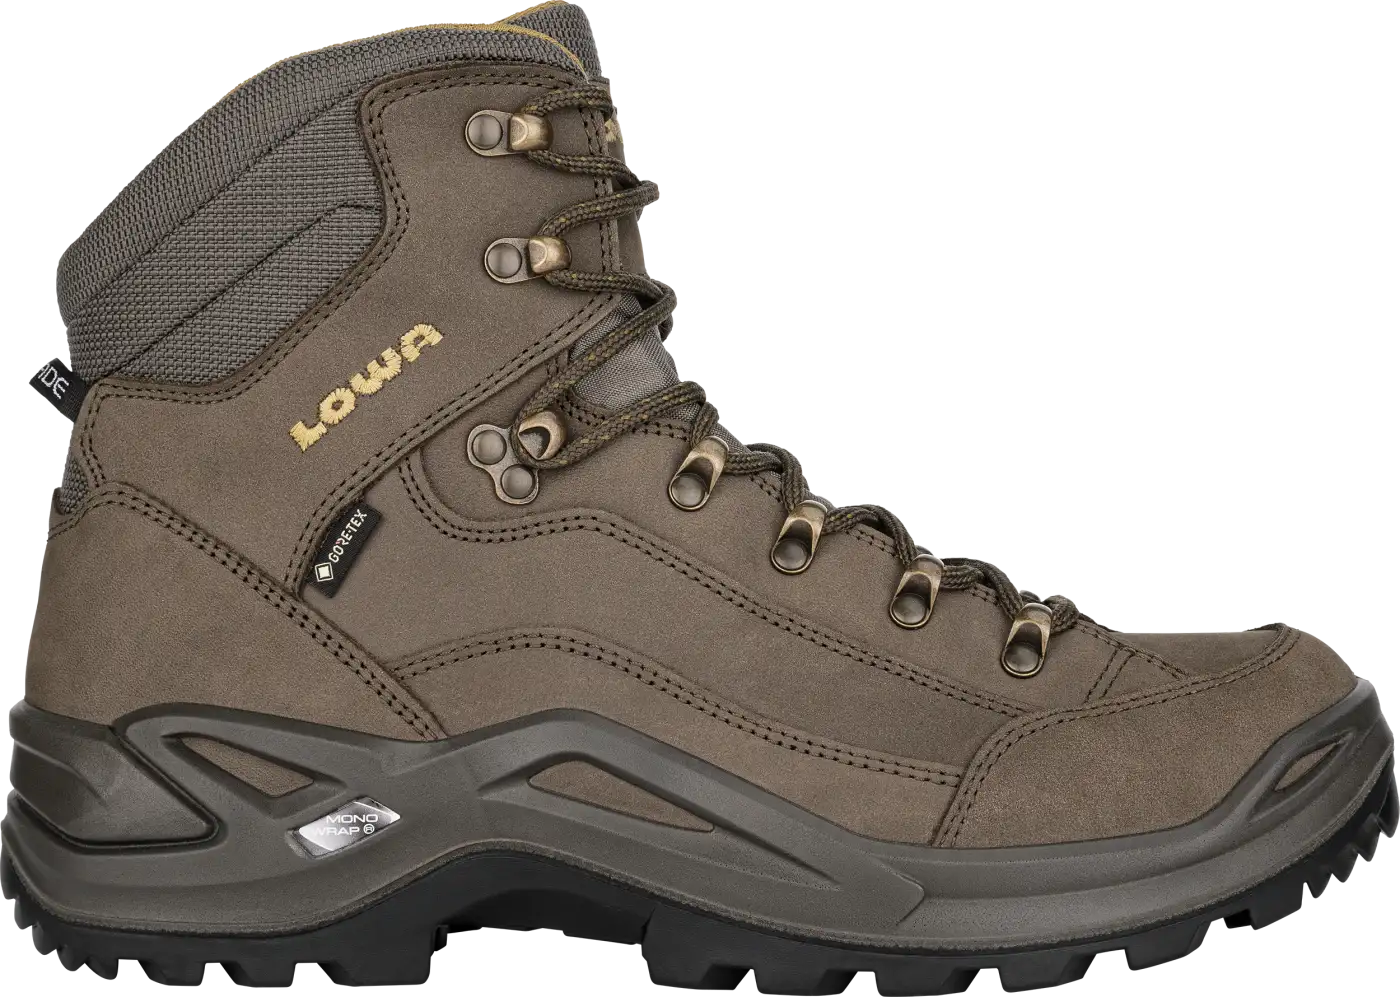 Buty LOWA Renegade GTX mid 310945 7898_renegade gtx mid_2021_outer